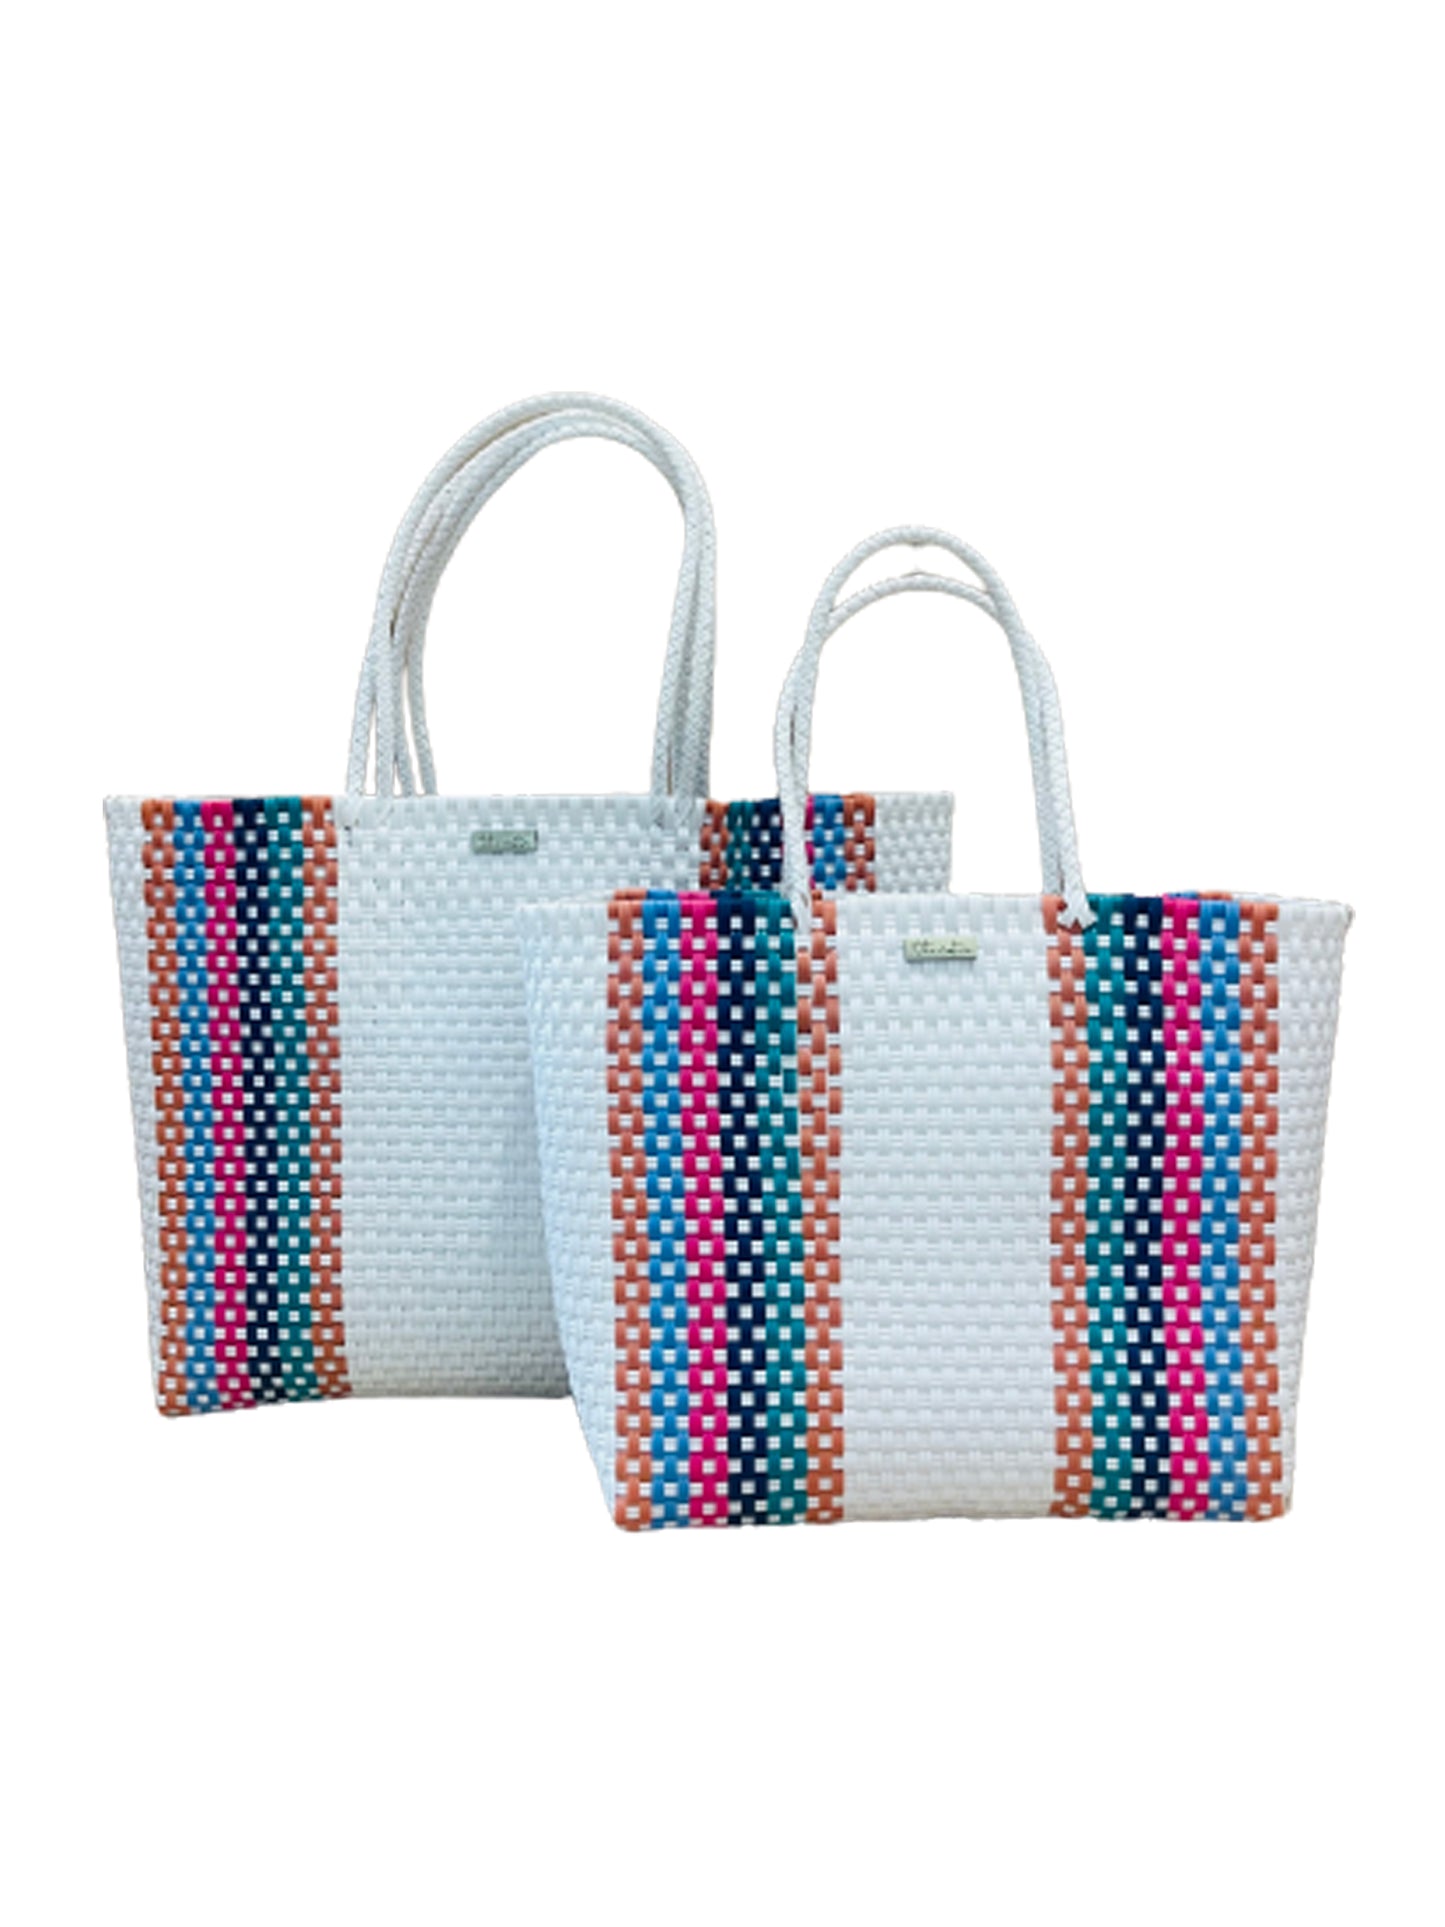 playa tote small and large colorful white